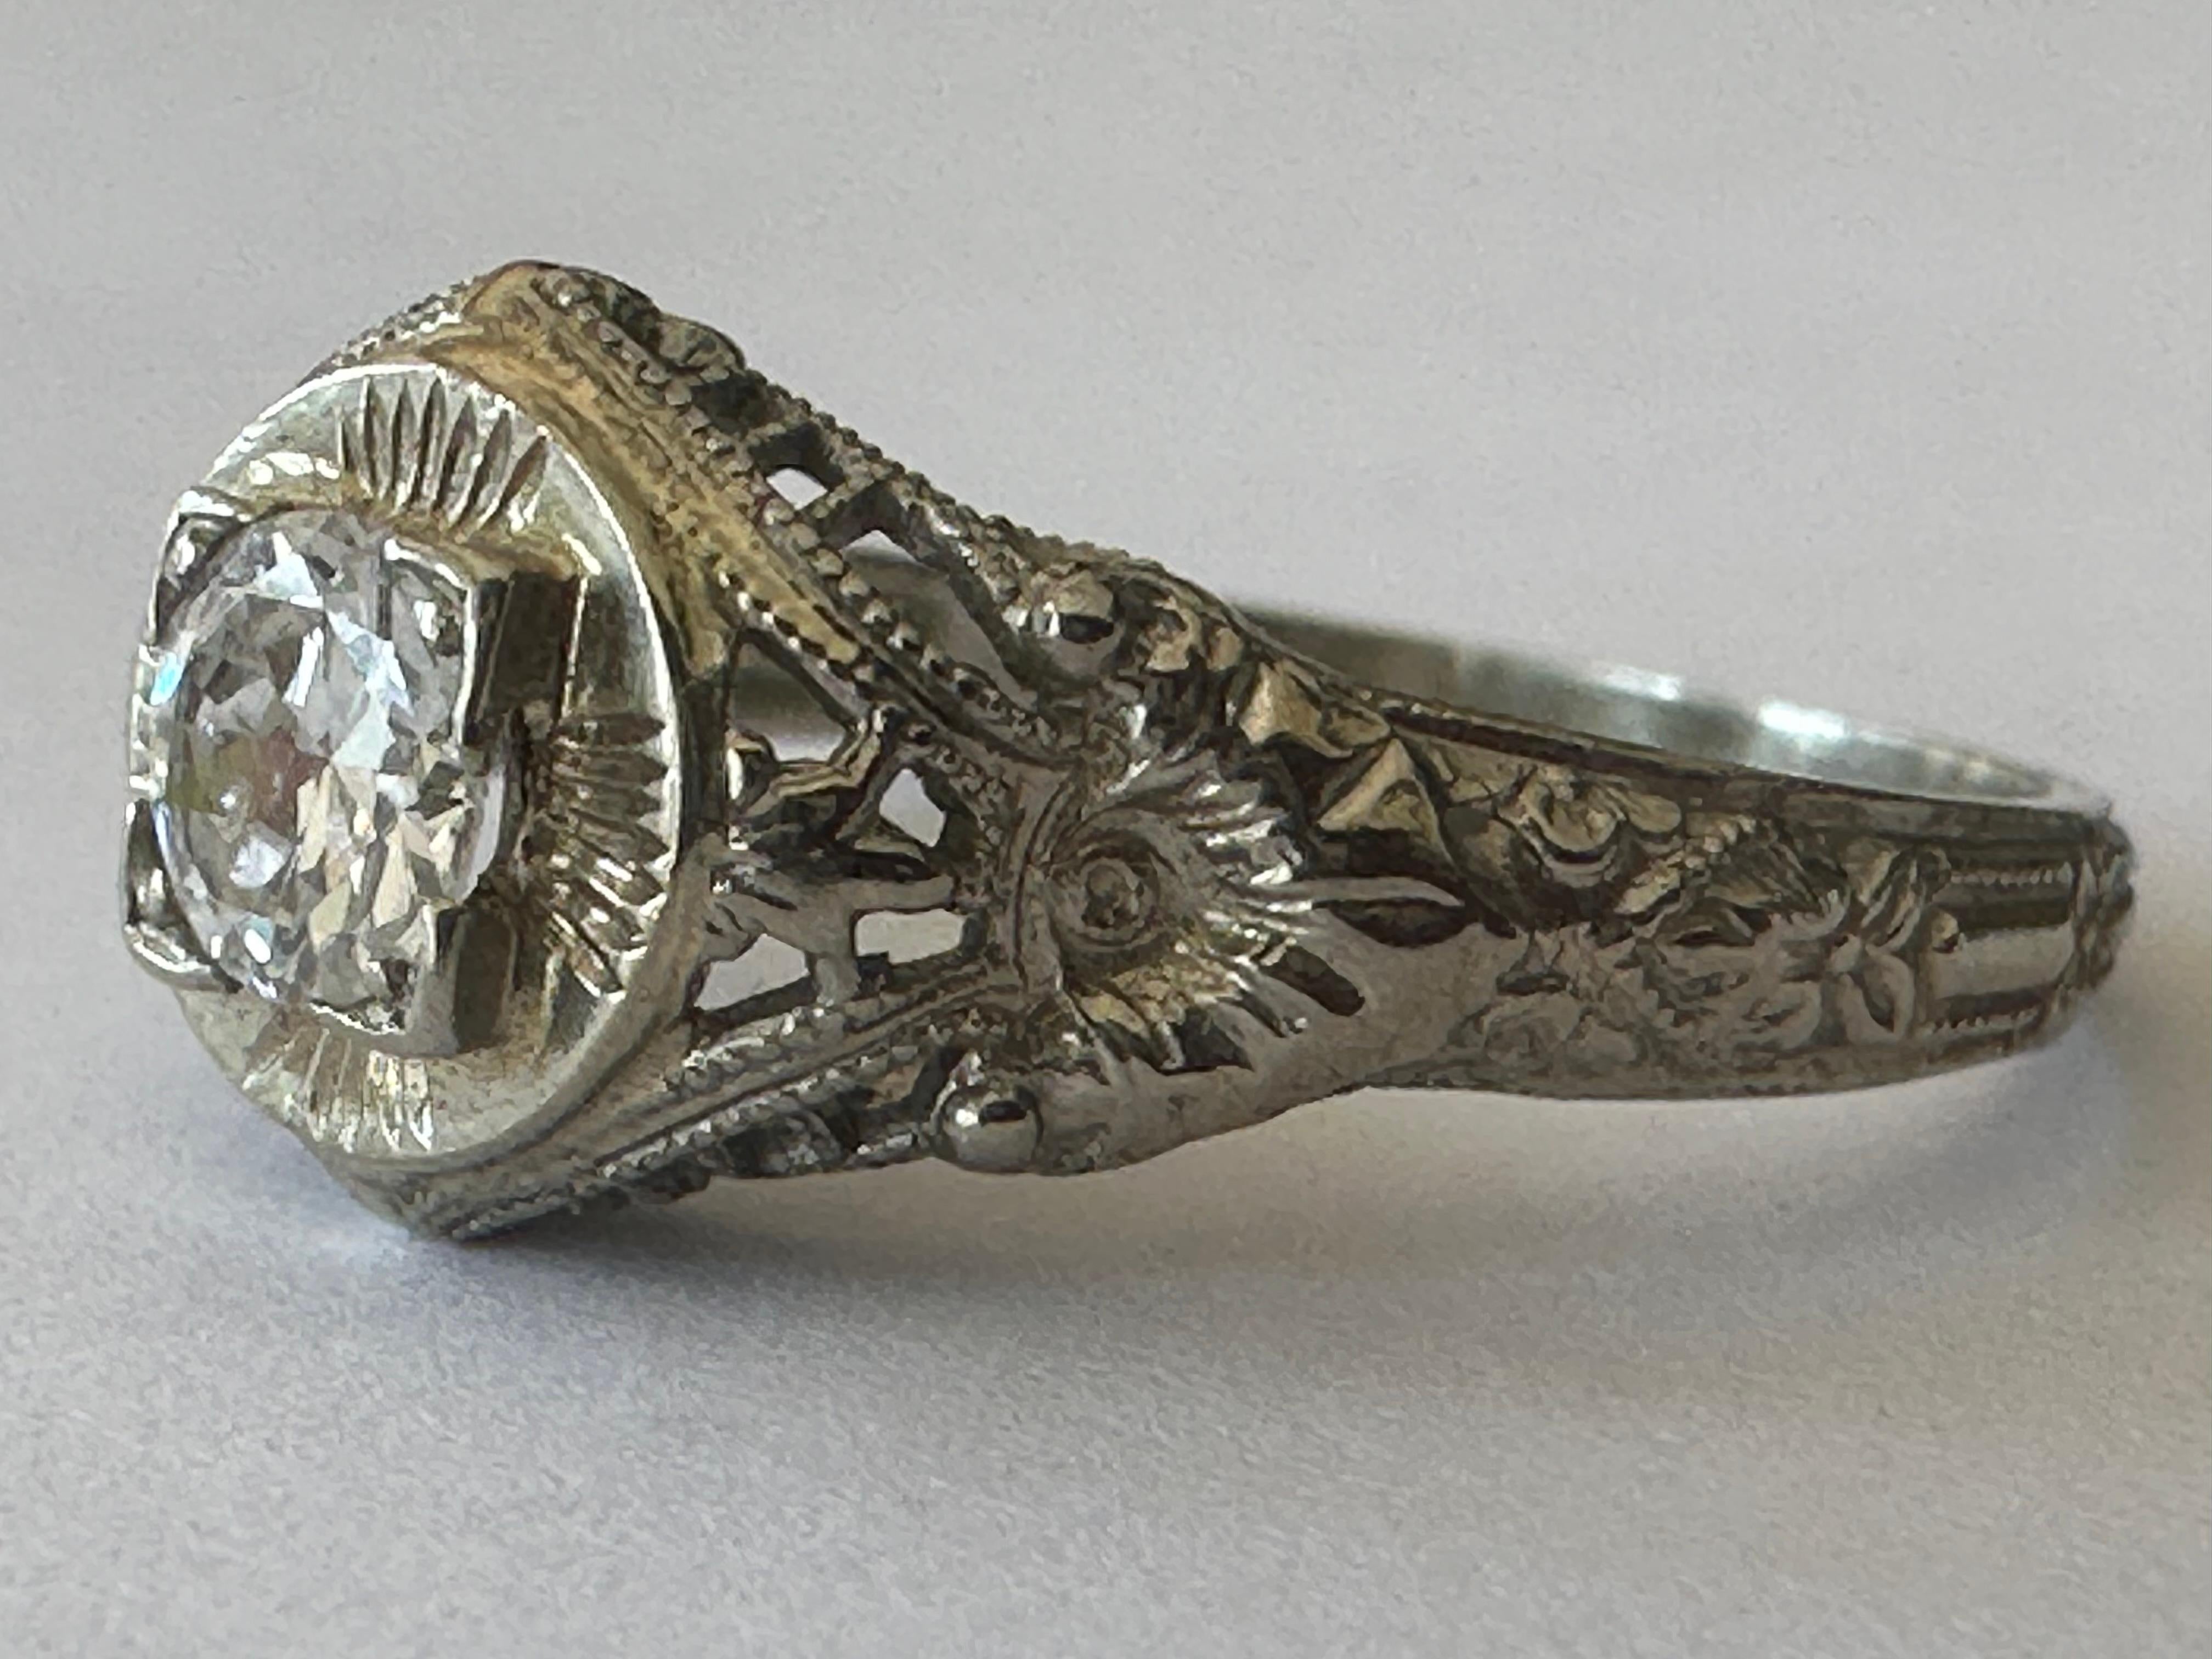 An Old European-cut diamond measuring approximately 0.30 carat, F color VS clarity, shines at the center of this late Art Deco gem atop a fanciful filigree mounting and a finely engraved shank. Set in 18K white gold. Circa 1940. 
